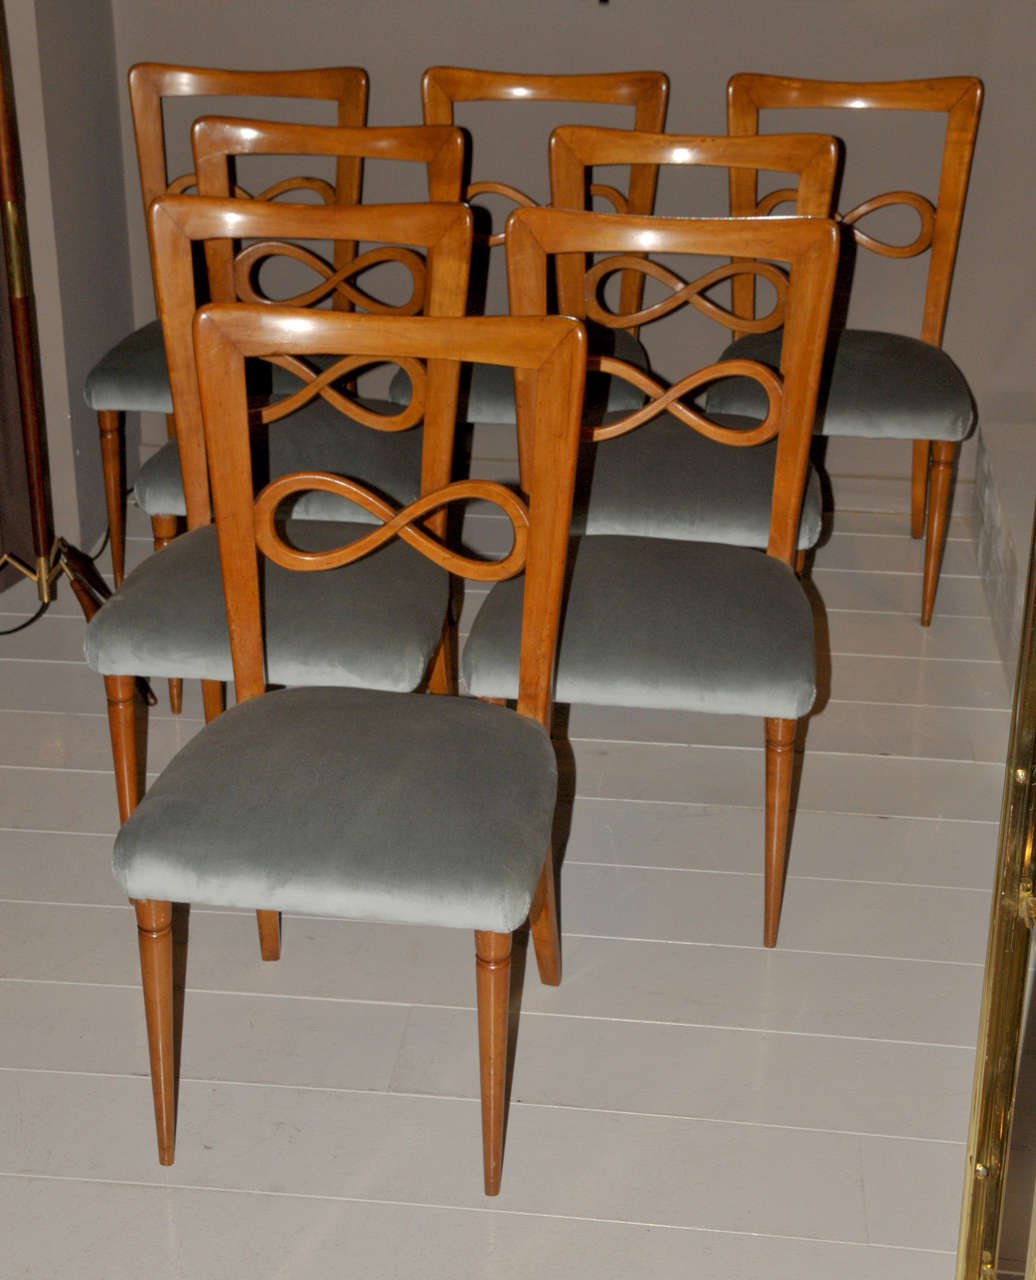 Set of eight 1950's Italian chairs in walnut with grey-blue velvet (non original). Good condition. Normal wear consistent with age and use.